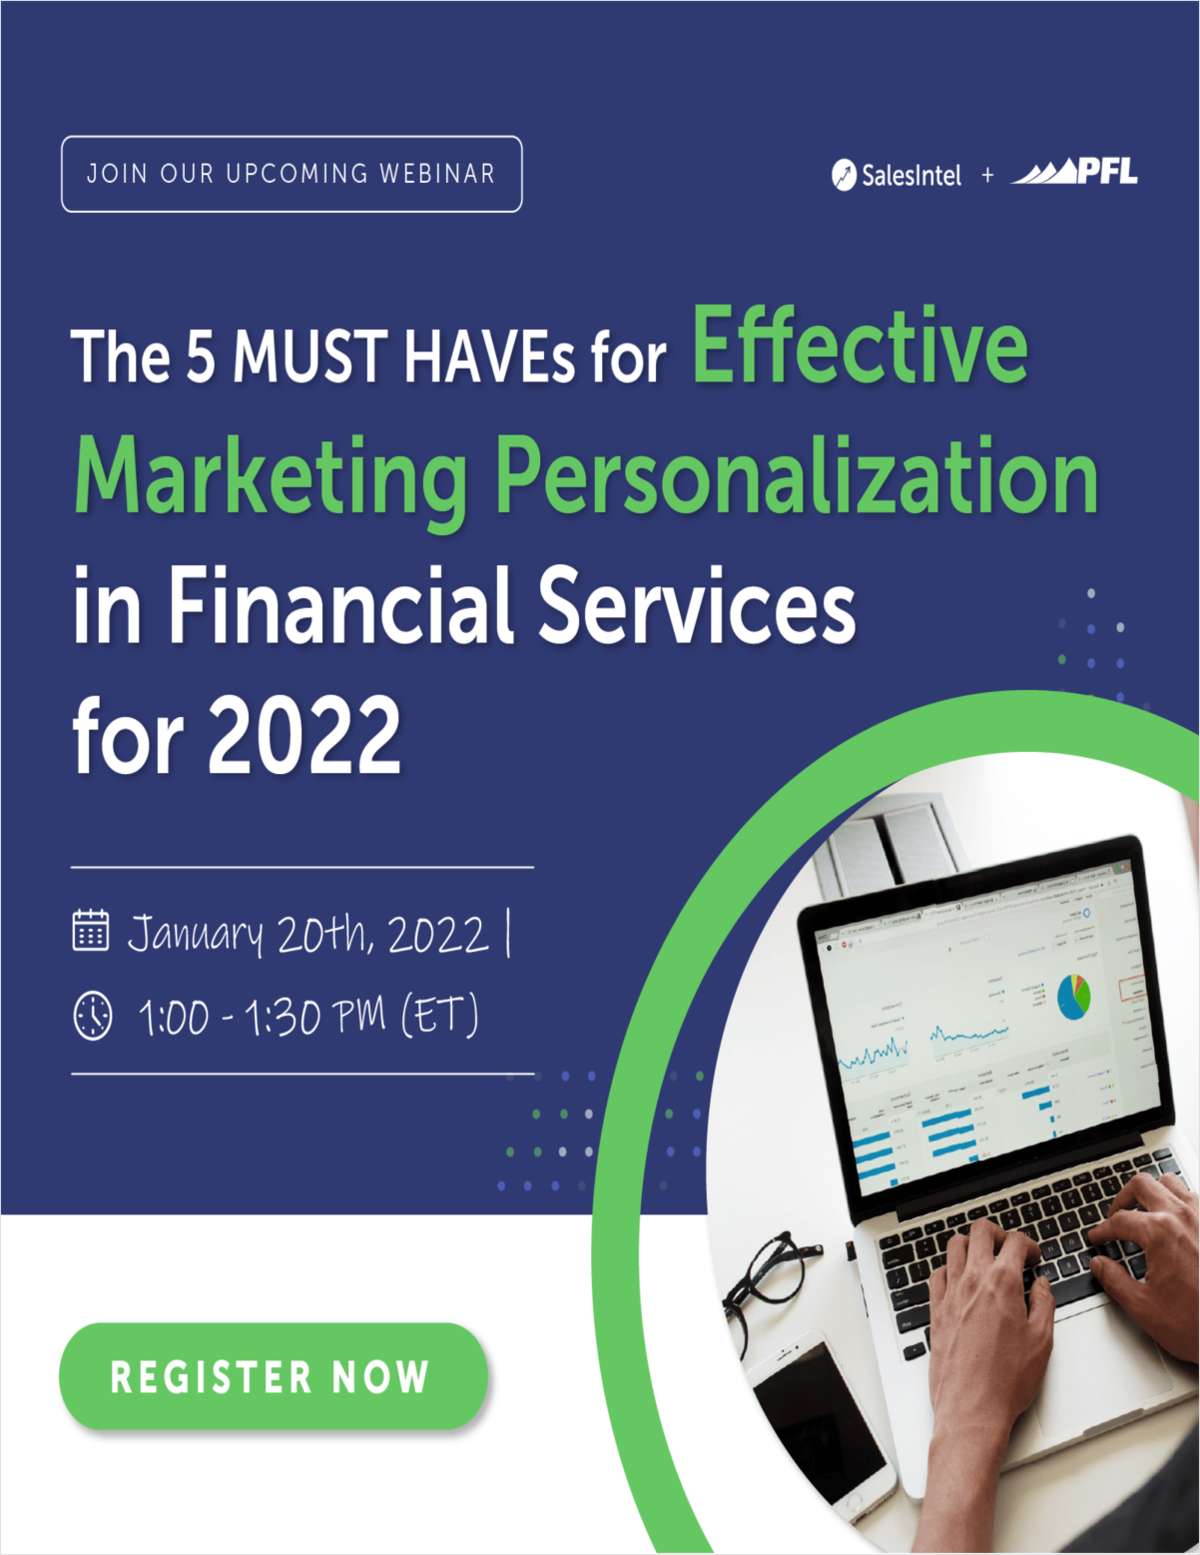 5 Must Have Personalization Tactics For Effective Marketing in Financial Services